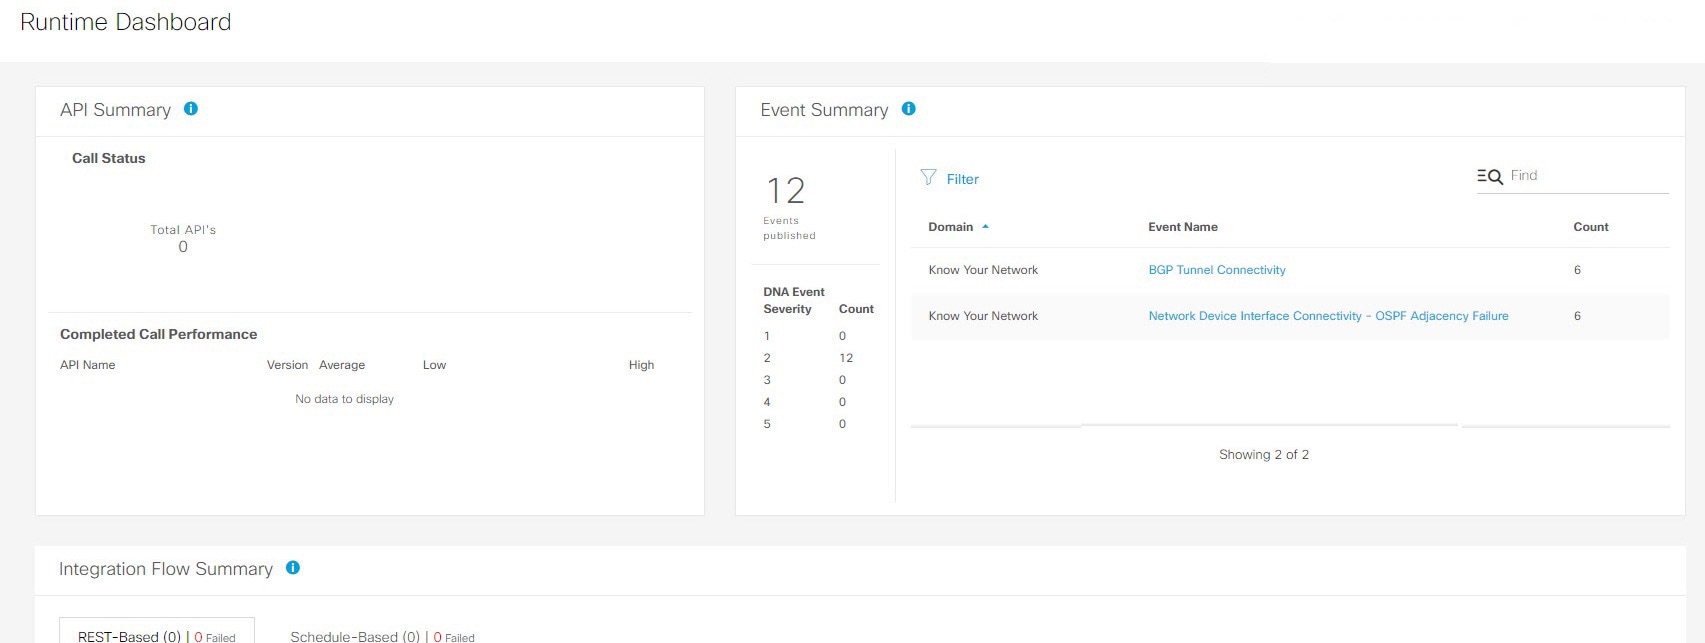 Figure 32: Event summary page on runtime dashboard.